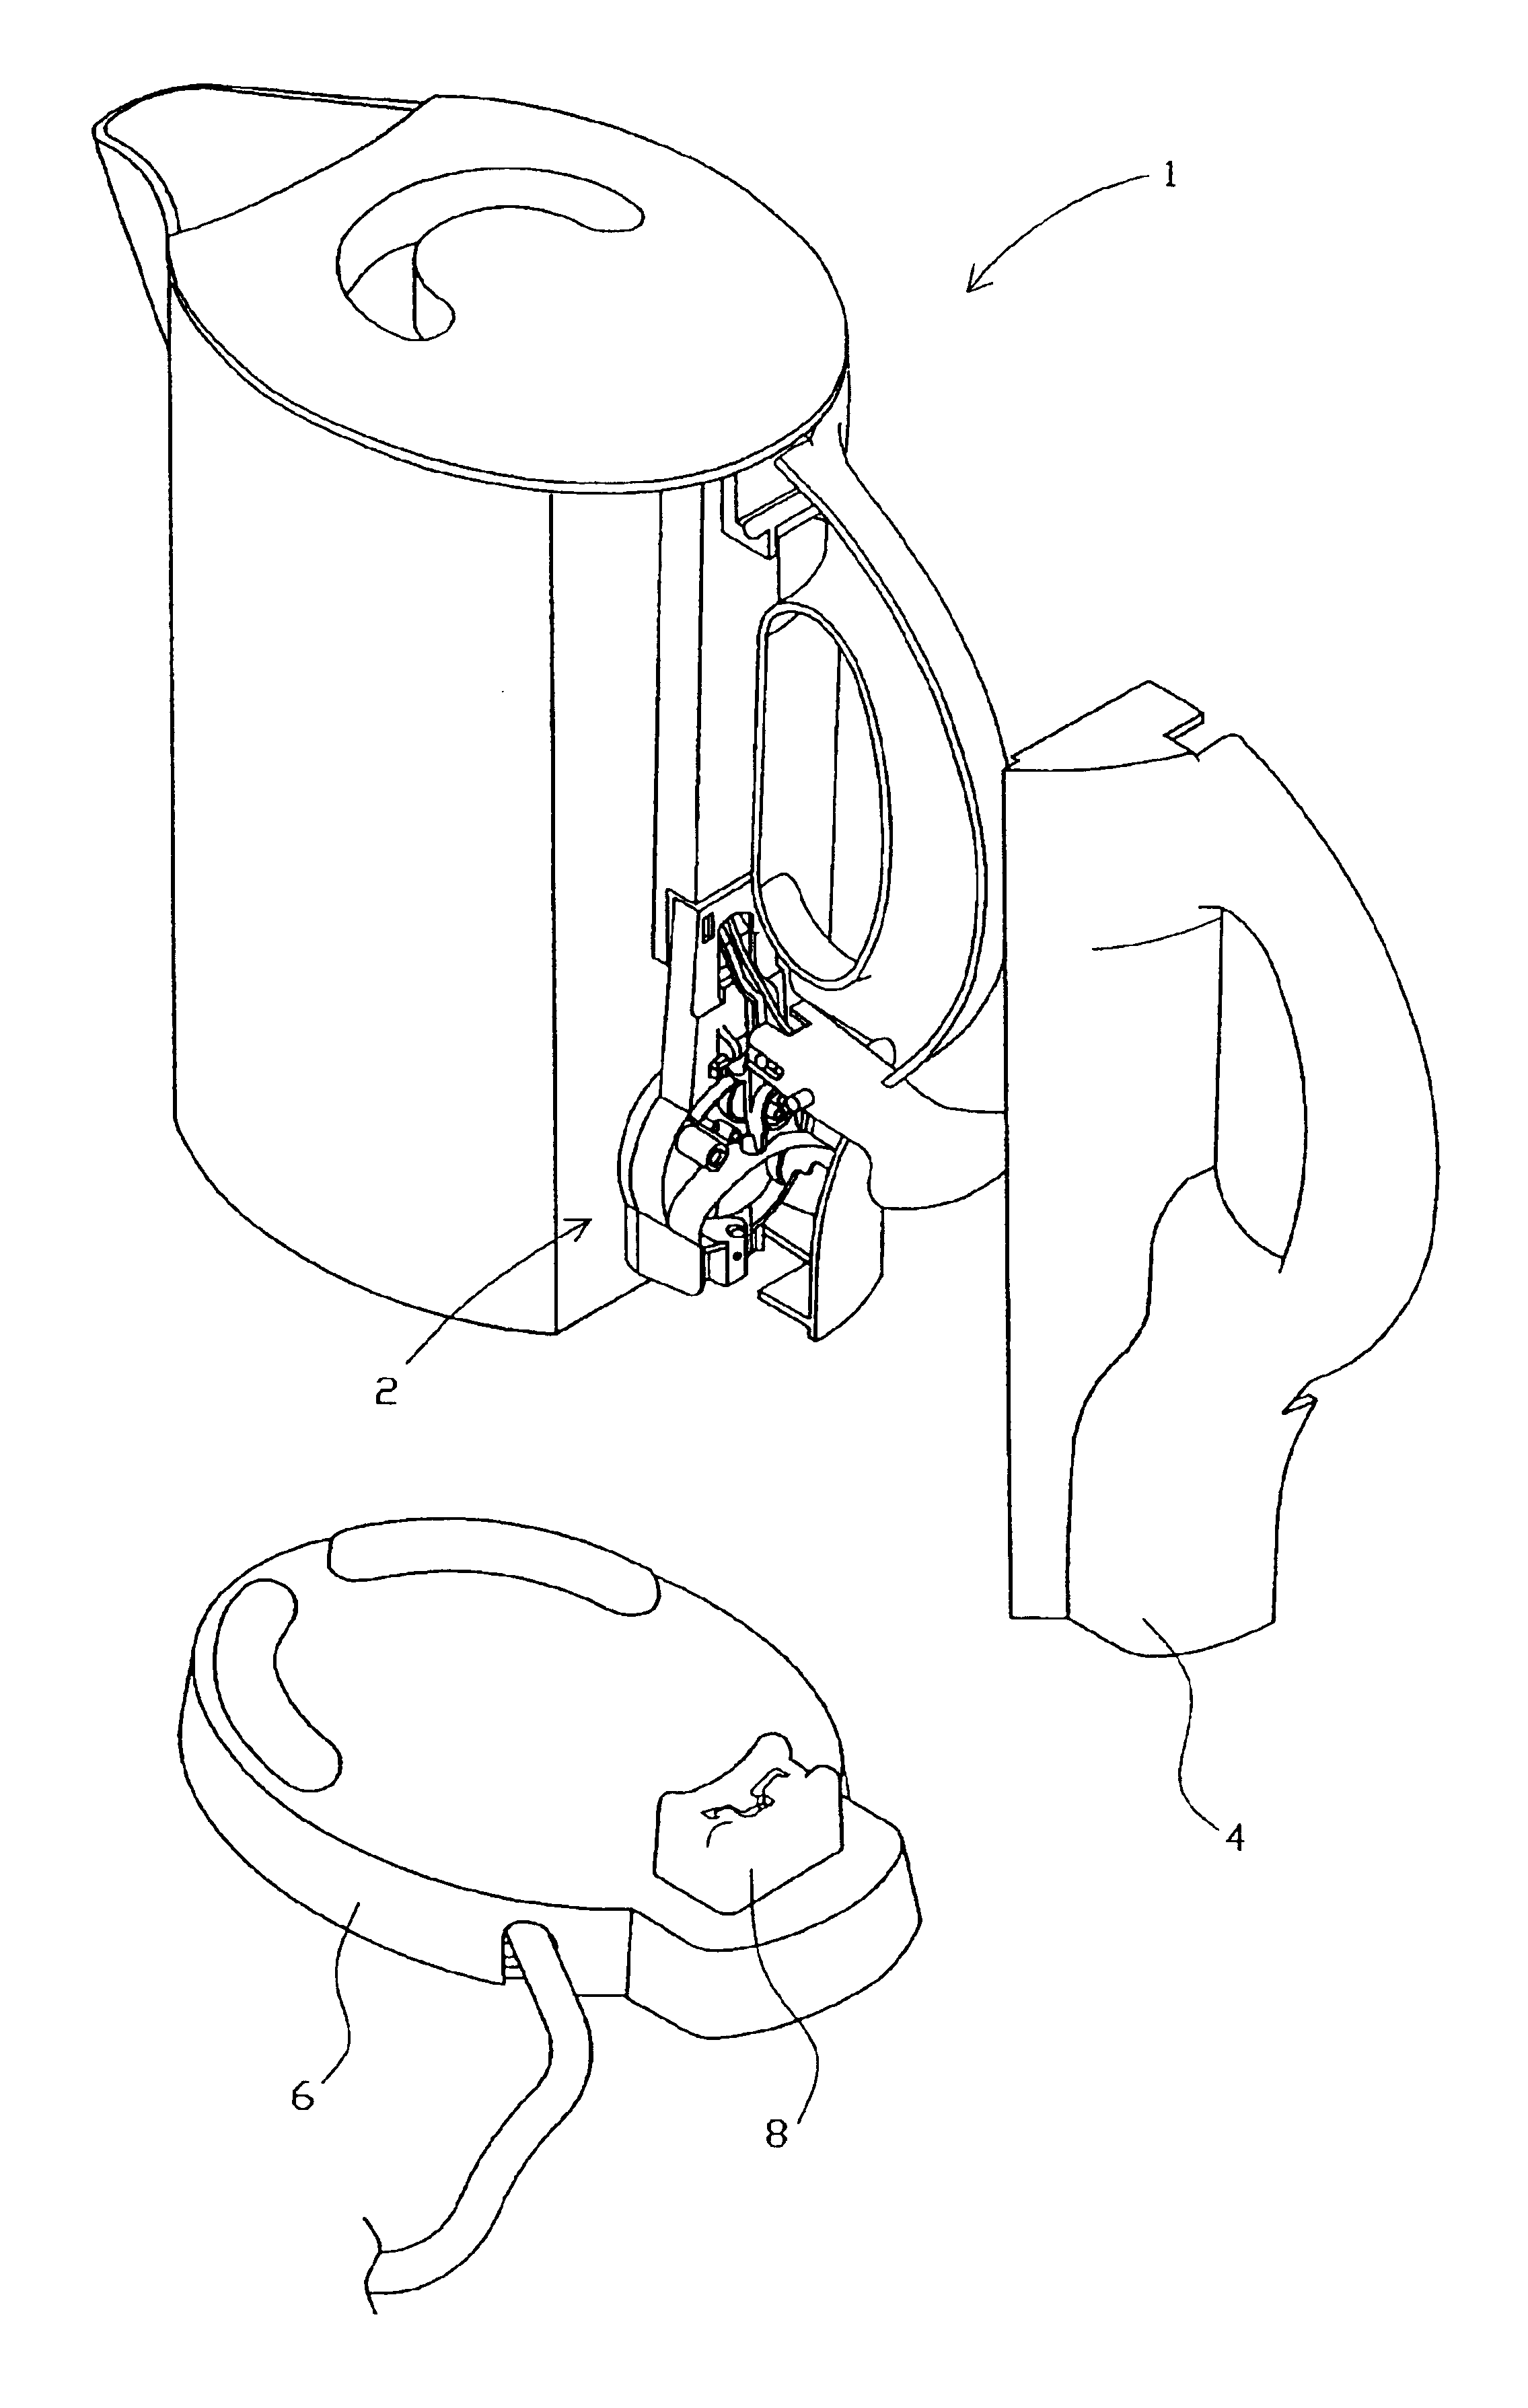 Combined control/connector for cordless electrical appliances